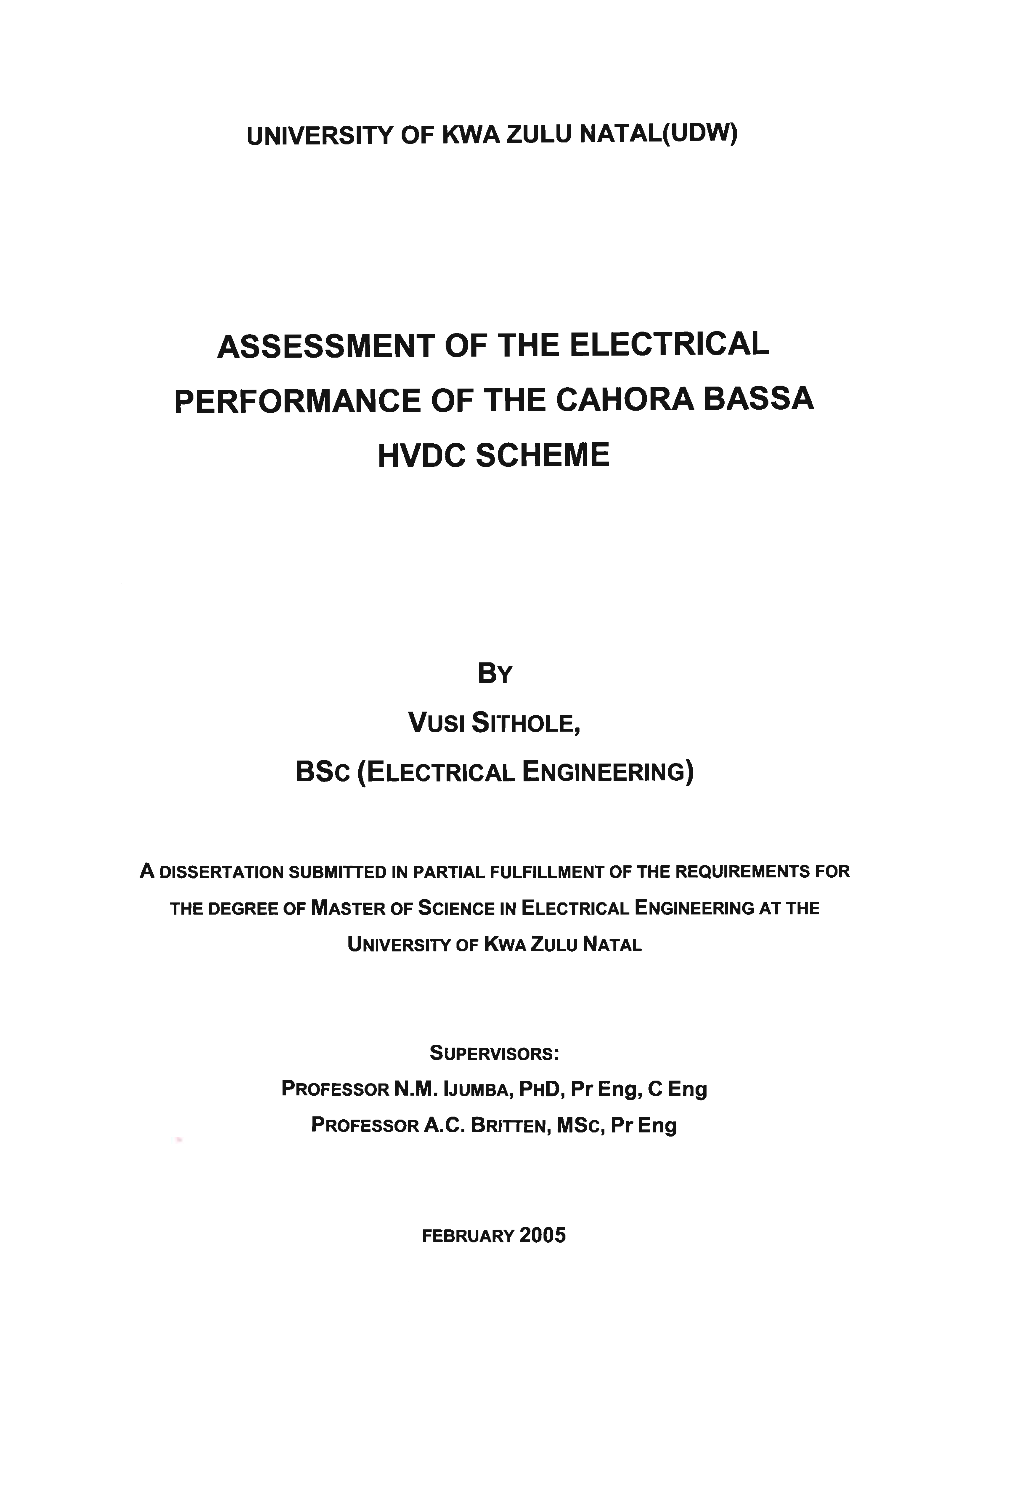 Assessment of the Electrical Performance of the Cahora Bassa Hvdc Scheme